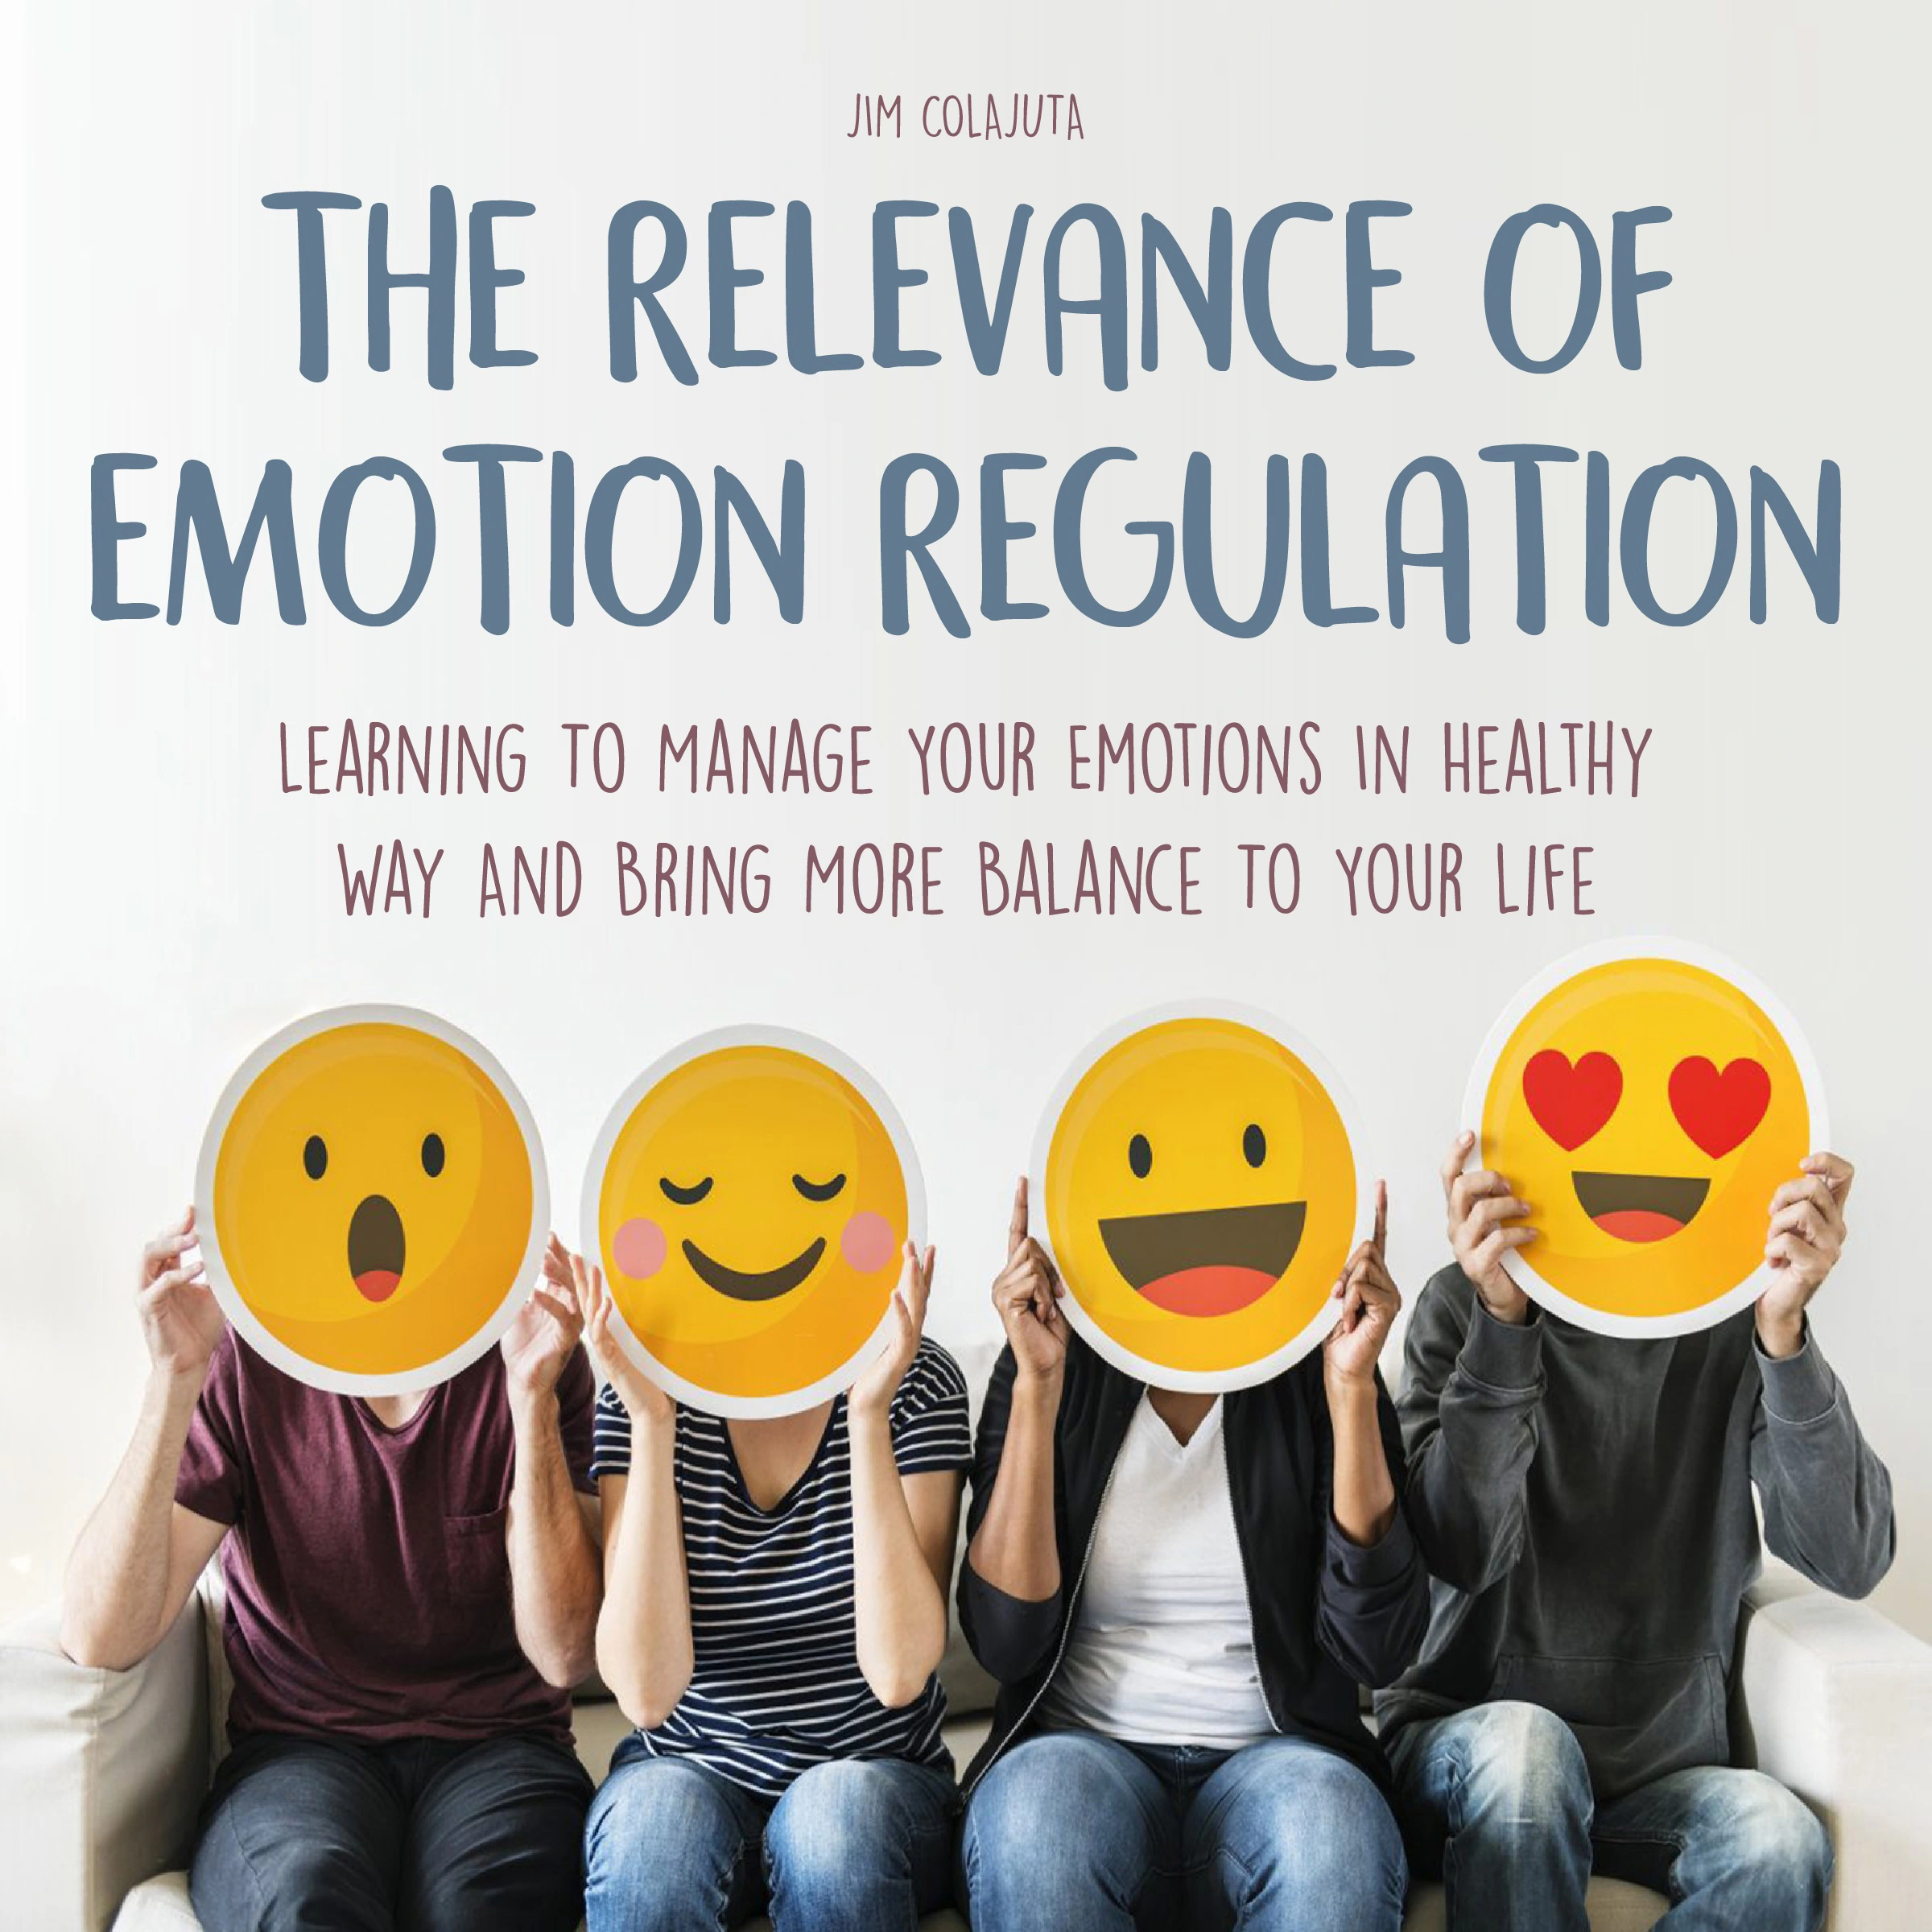 The Relevance of Emotion Regulation by Jim Colajuta Audiobook